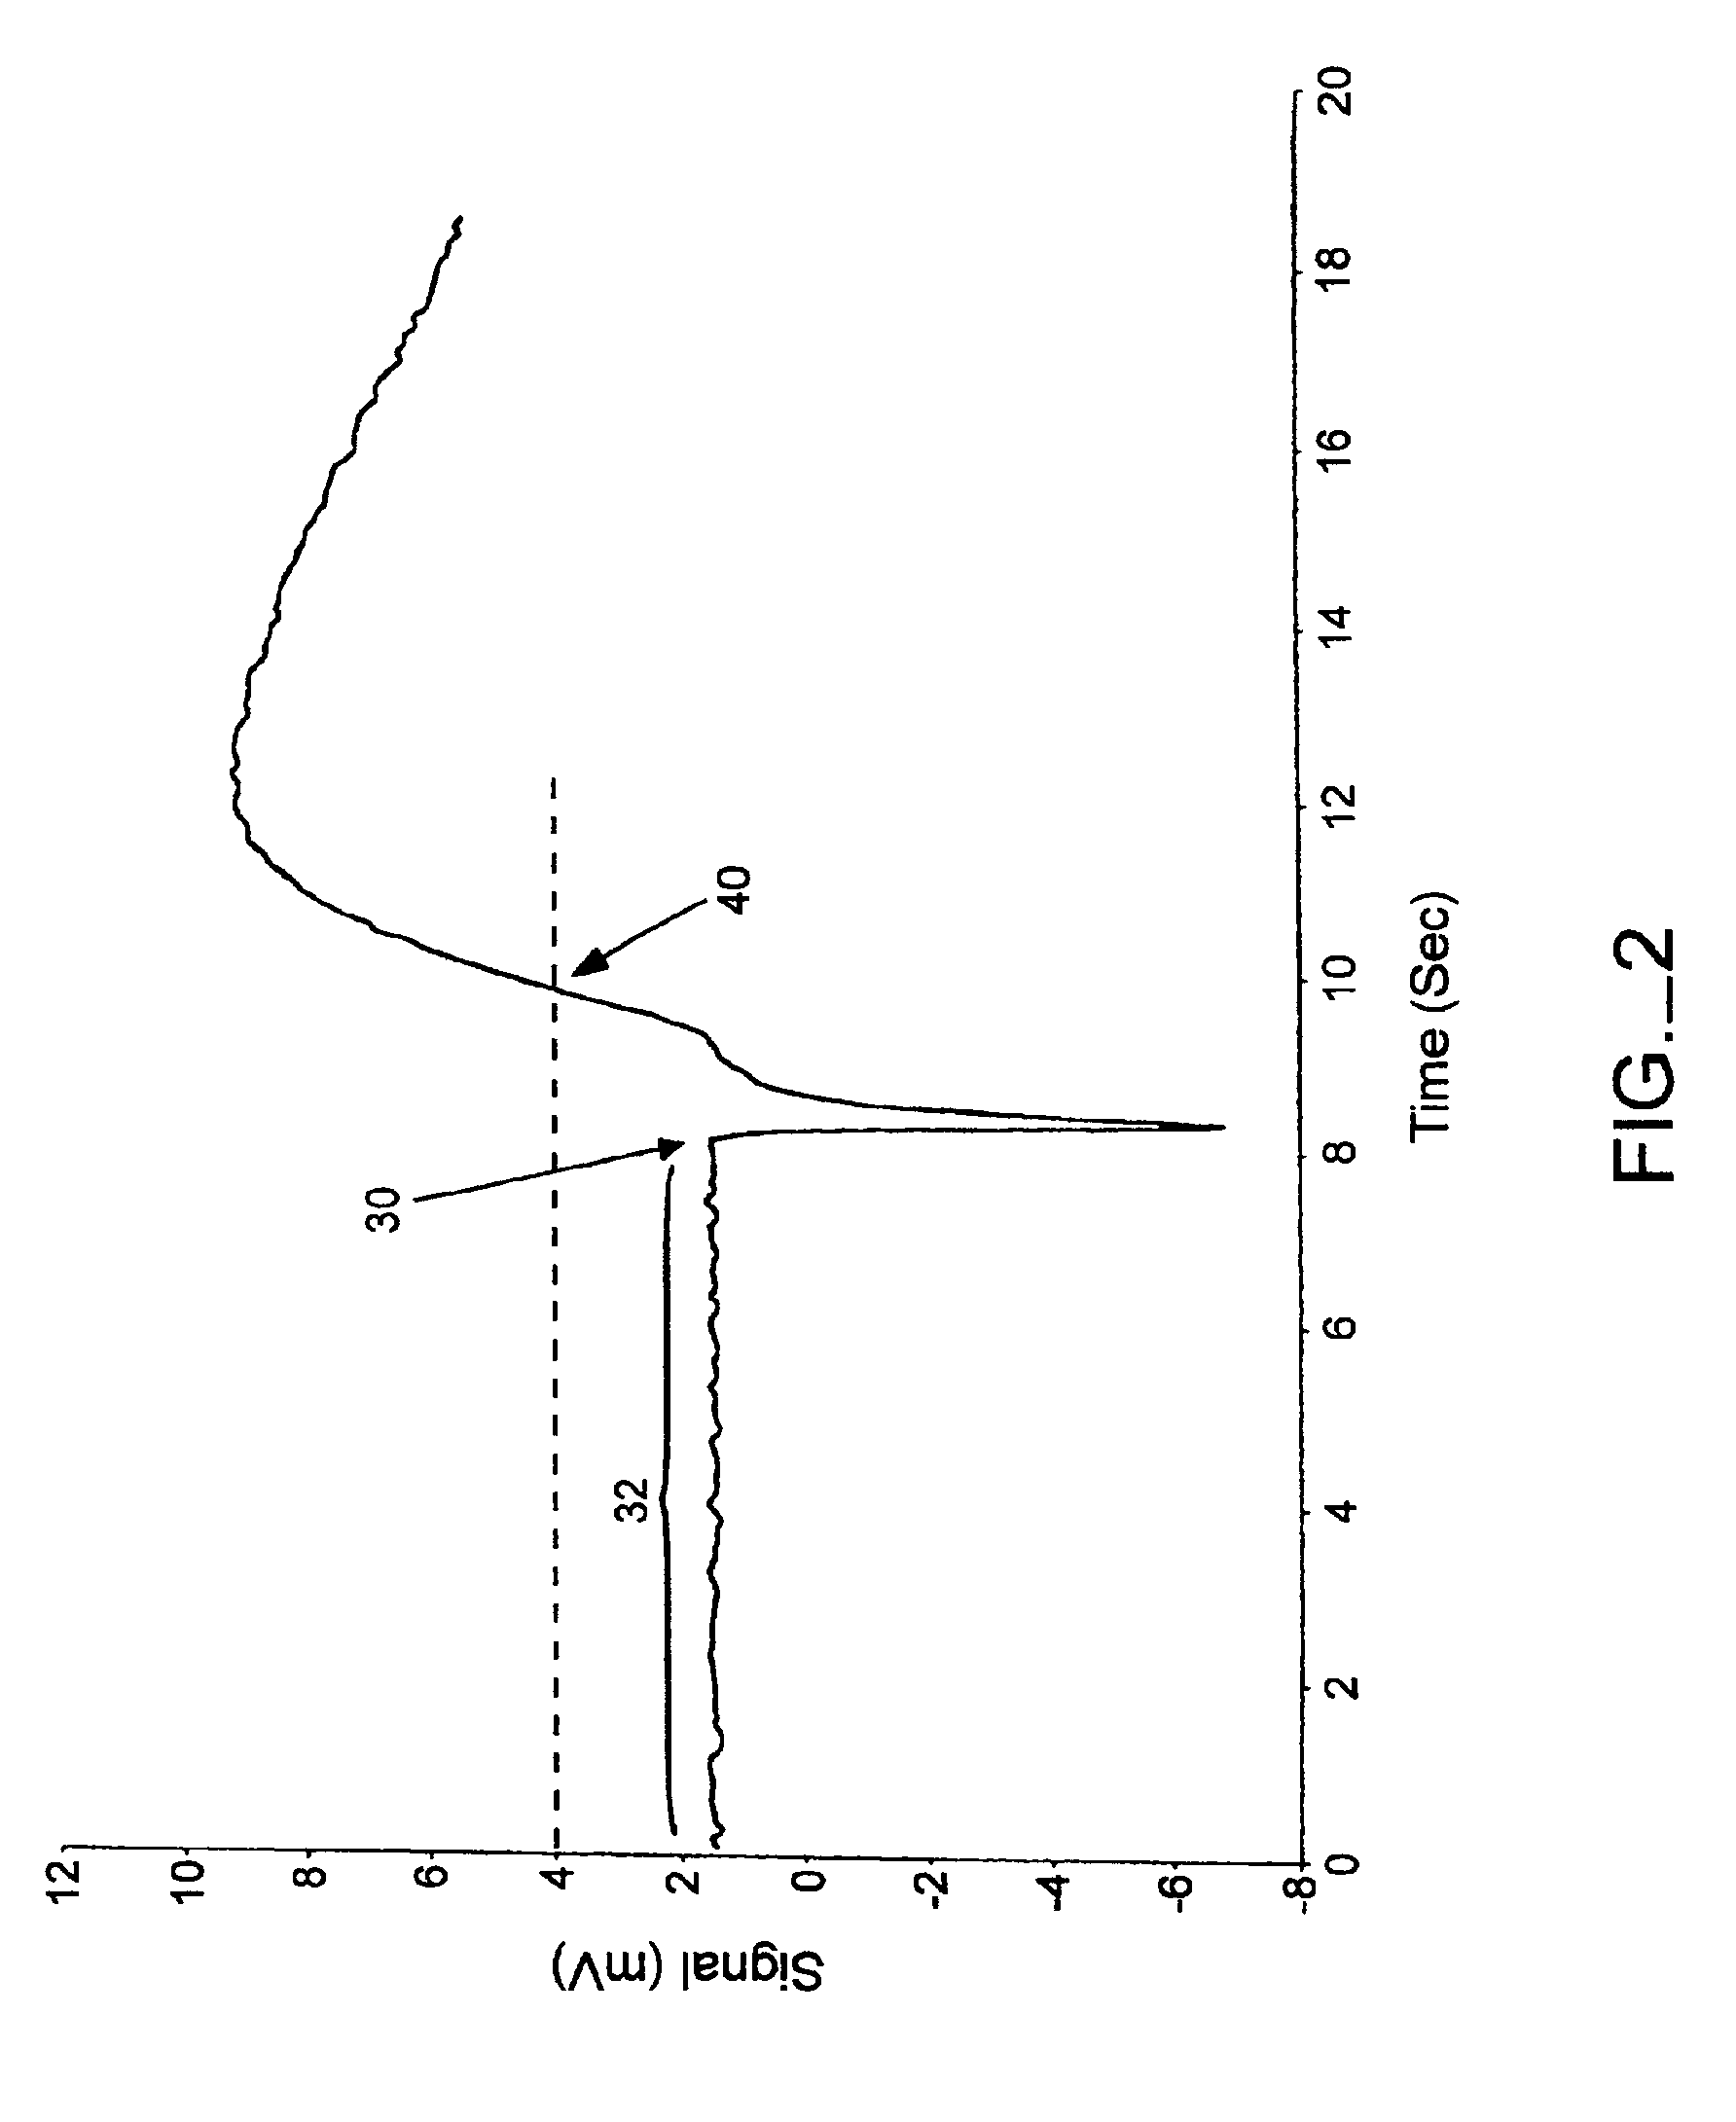 Passive sample detection to initiate timing of an assay